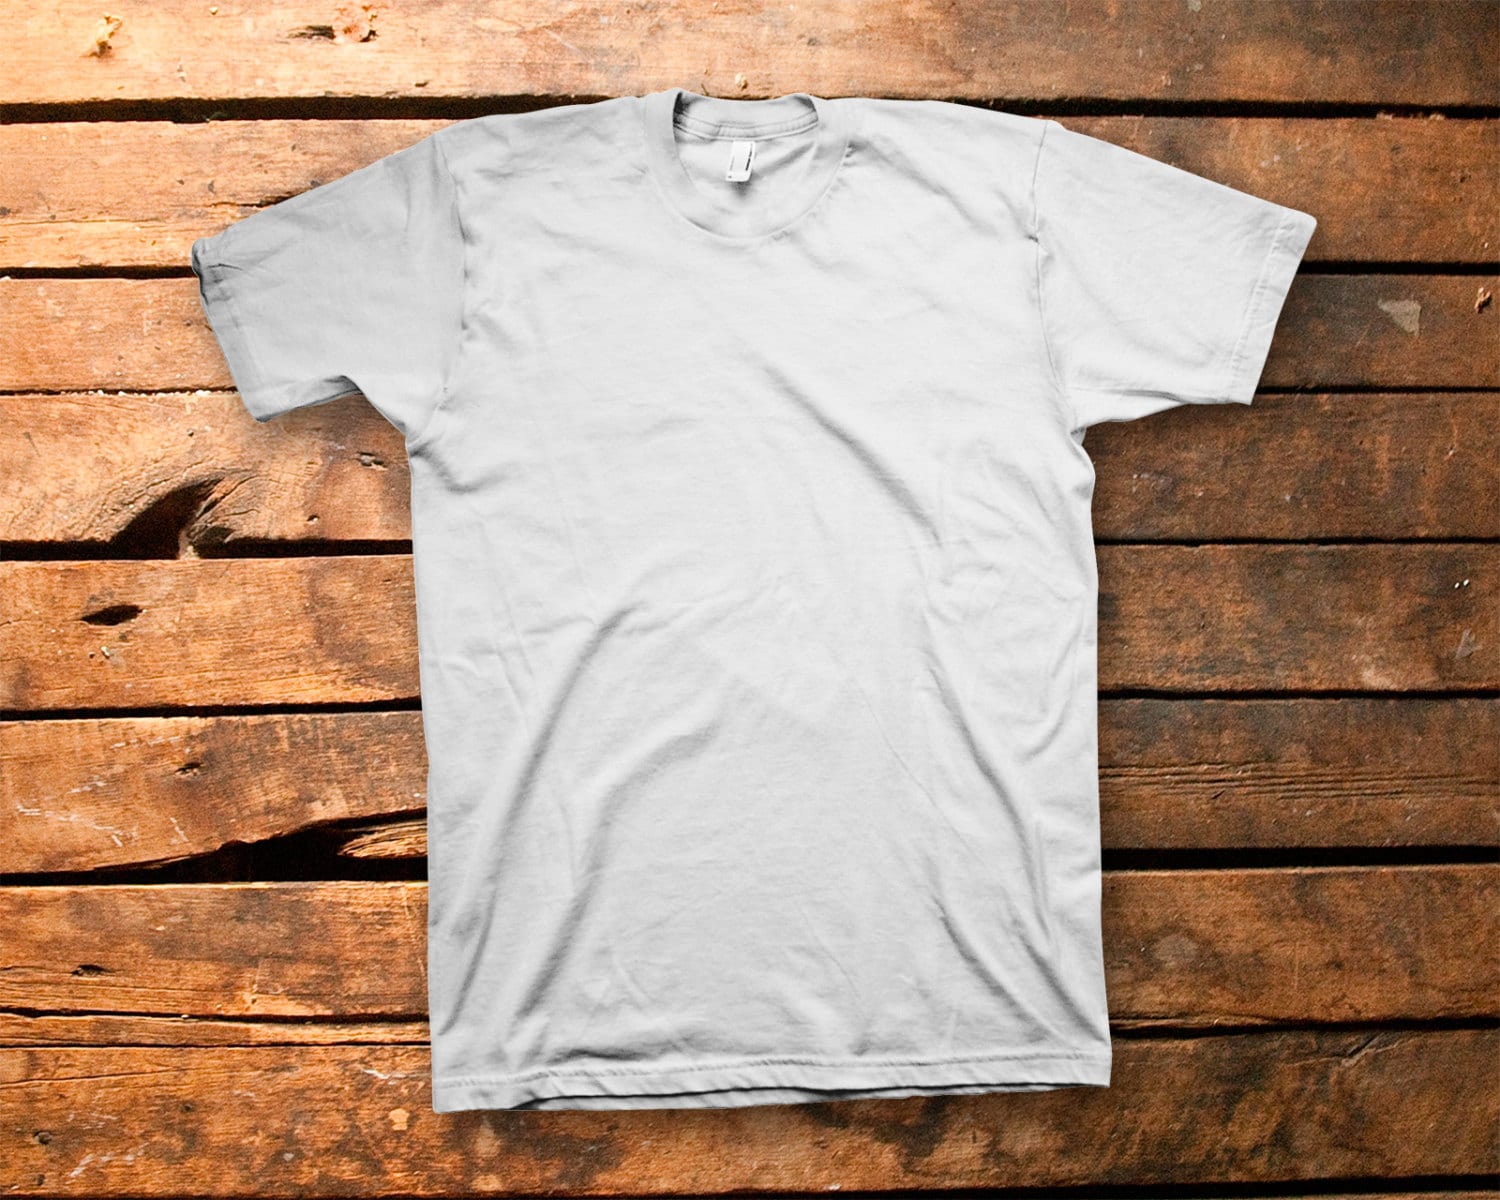 Free 1121+ Blank White Color T Shirt Mockup Yellowimages Mockups